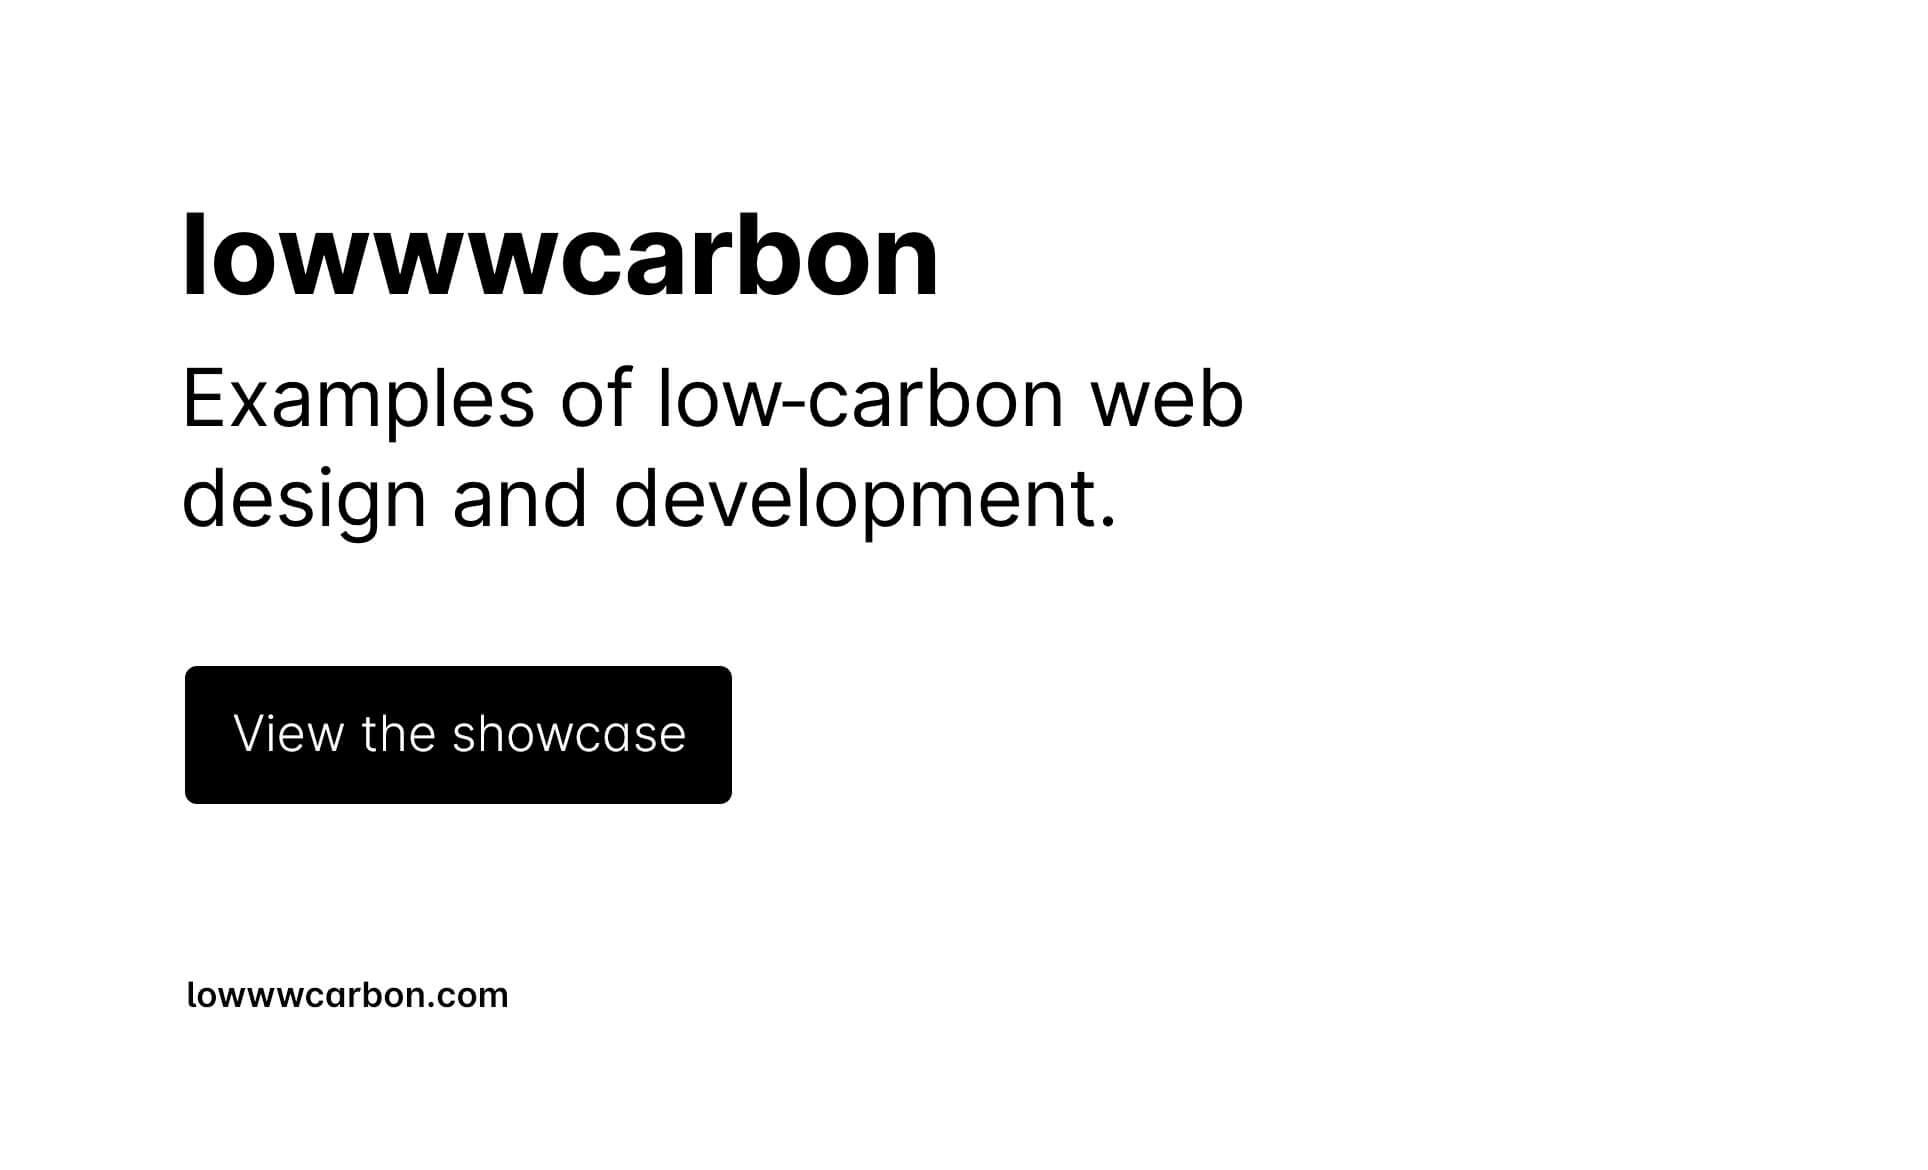 The lowwwcarbon website showcase